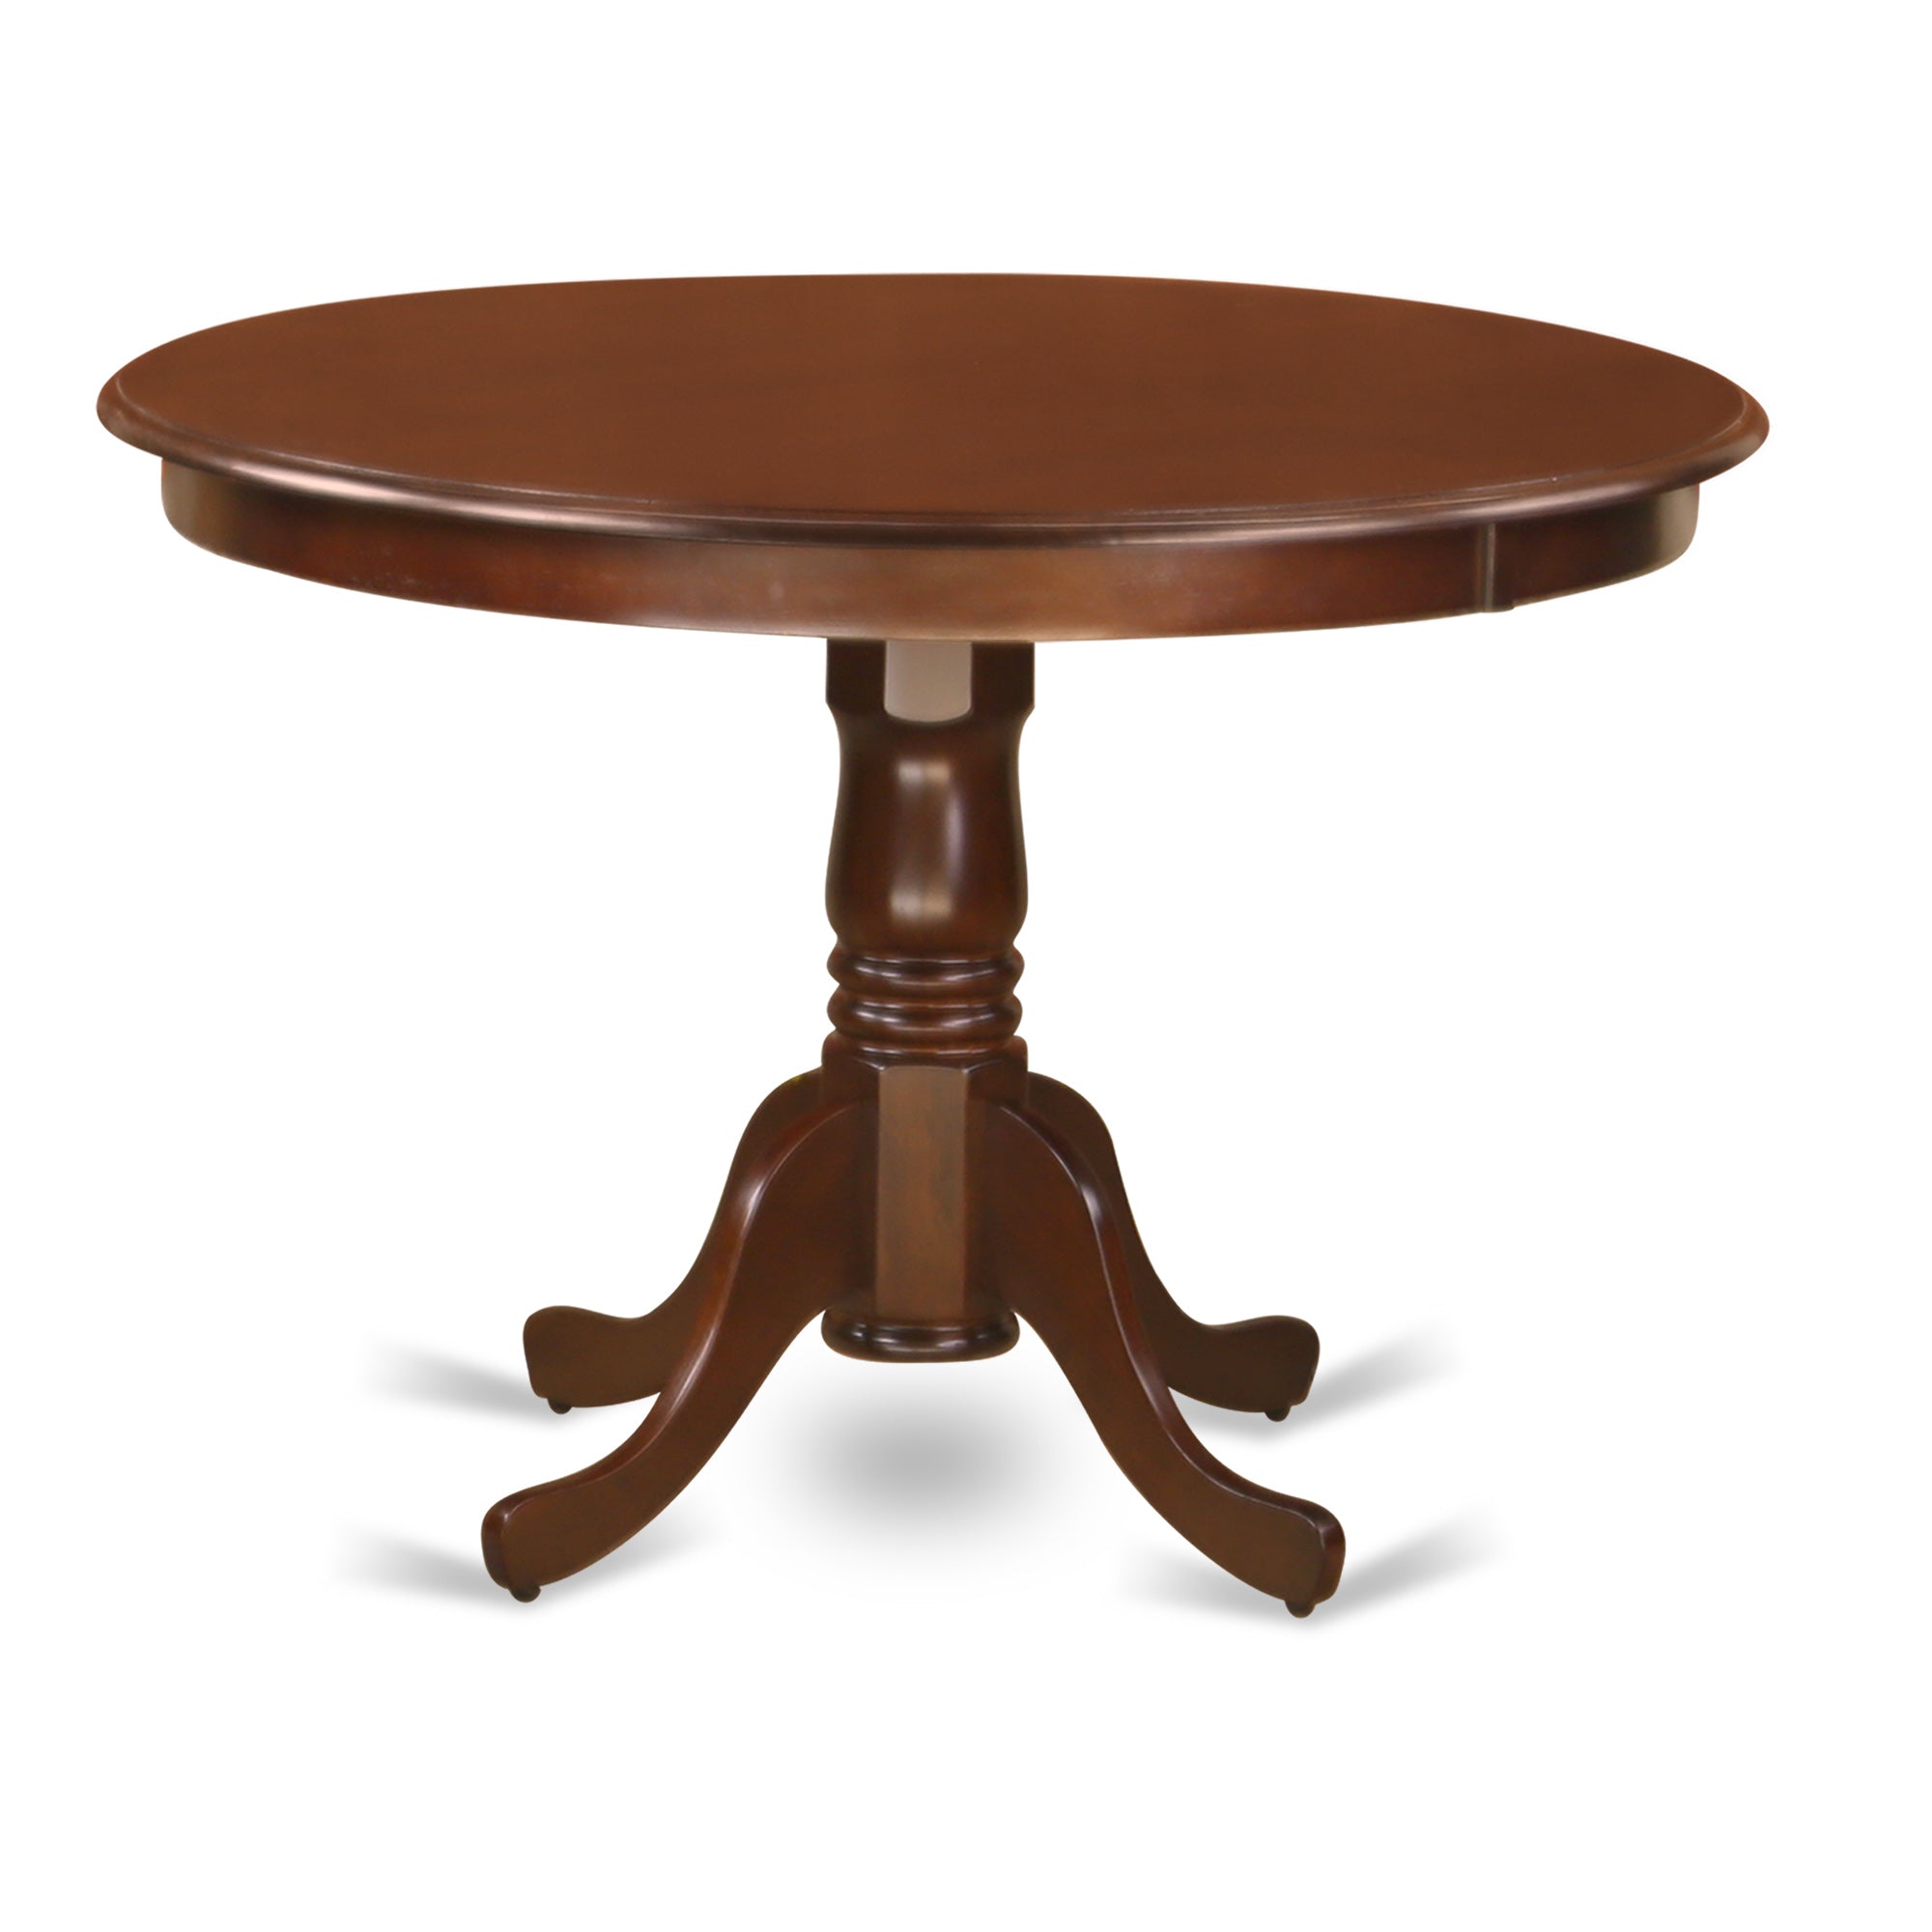 HLDU3-MAH-LC 3 Pc set with a Round Kitchen Table and 2 Leather Dinette Chairs in Mahogany